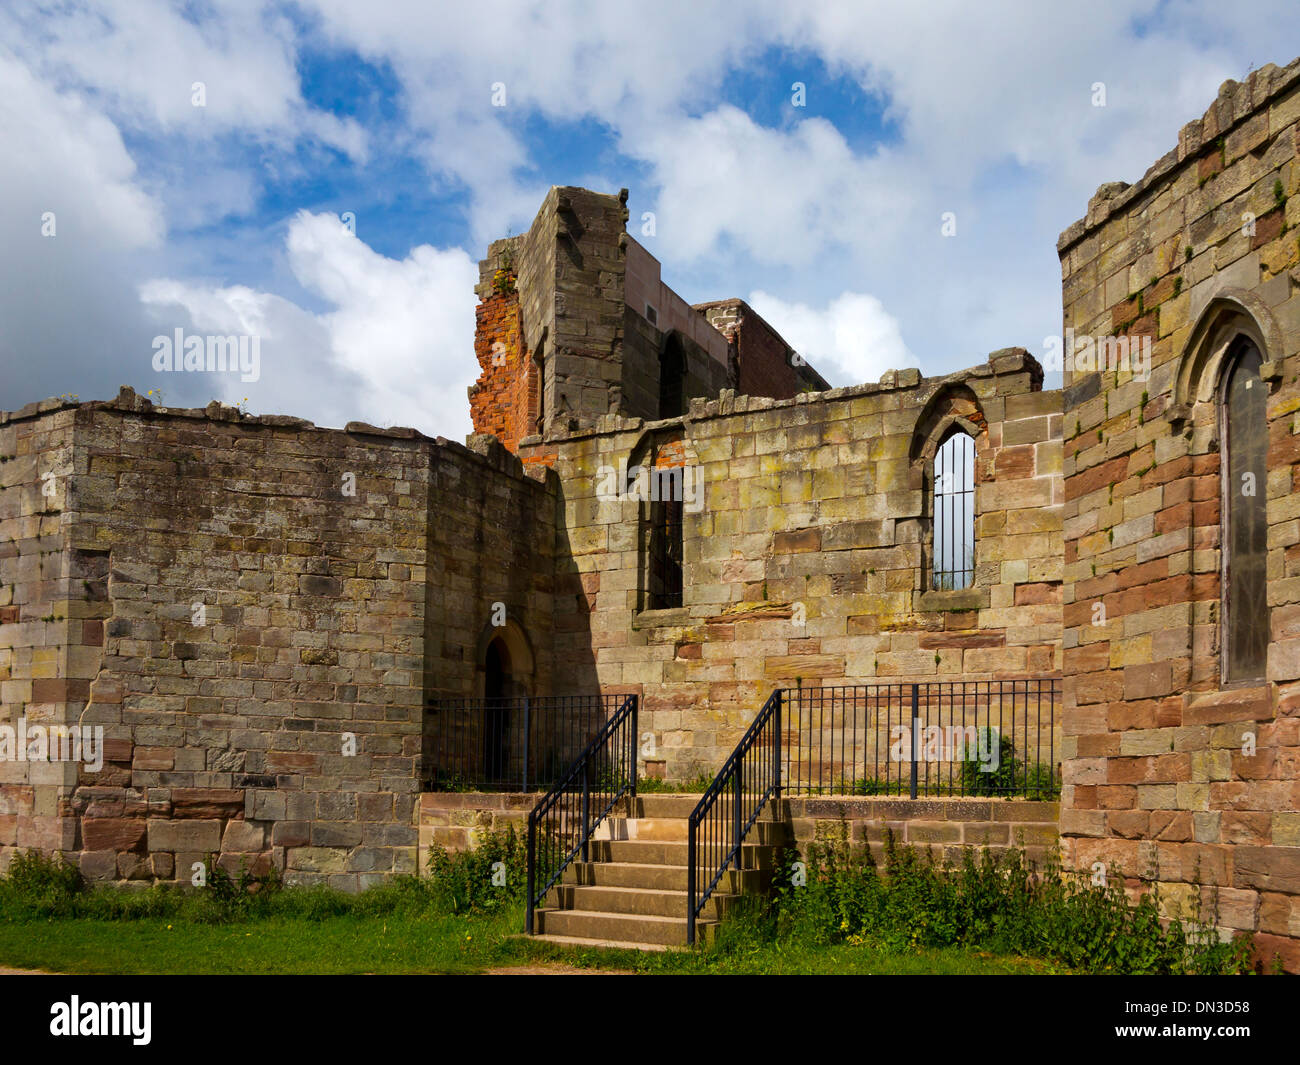 Part of the ruins of Stafford Castle Staffordshire England UK a gothic revival stone keep based on original medieval foundations Stock Photo